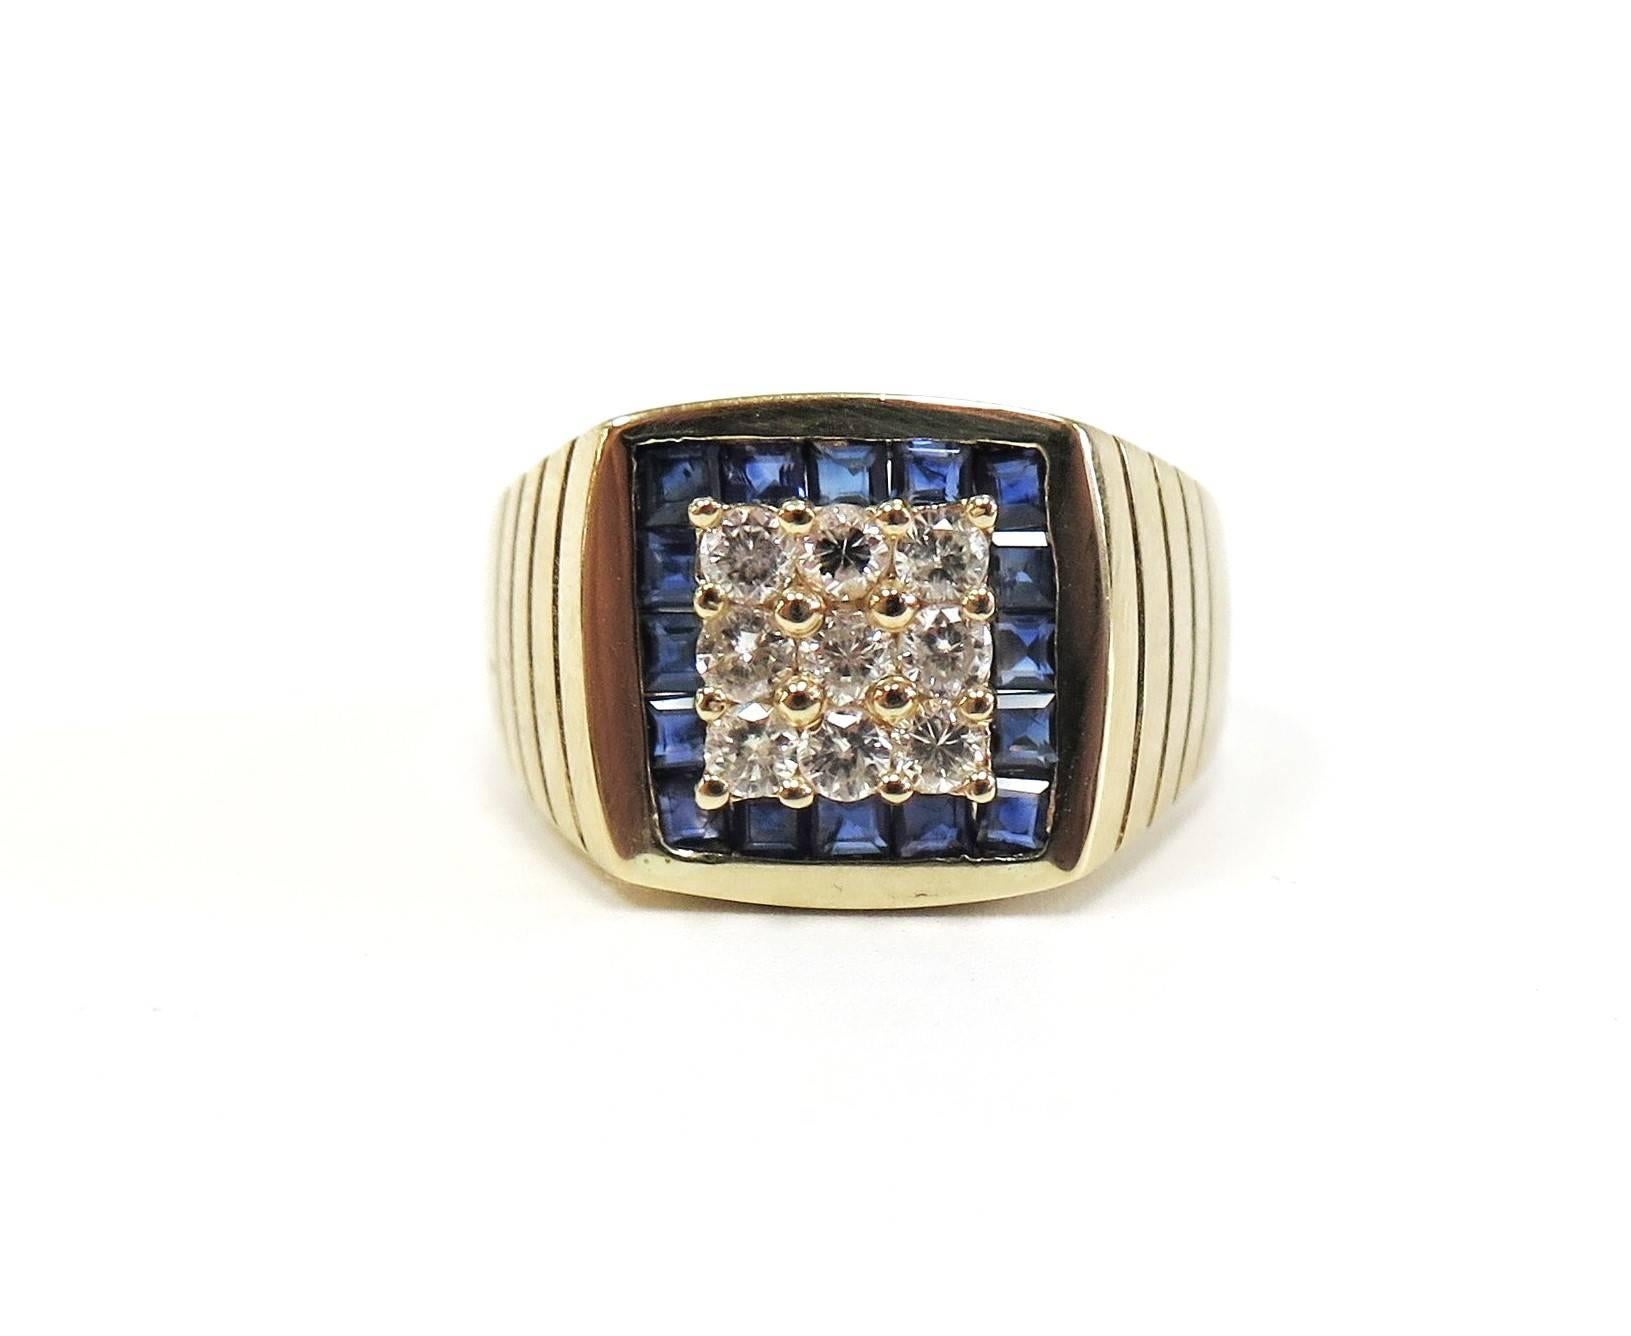 Quietly authoritative, this Men's Diamond Cluster Ring has a square of 9 sparkly Diamonds totaling 0.45 Carats, surrounded by a halo of calibrated square cut midnight blue Sapphires. This ring commands attention! 

Sapphires measures 2 x